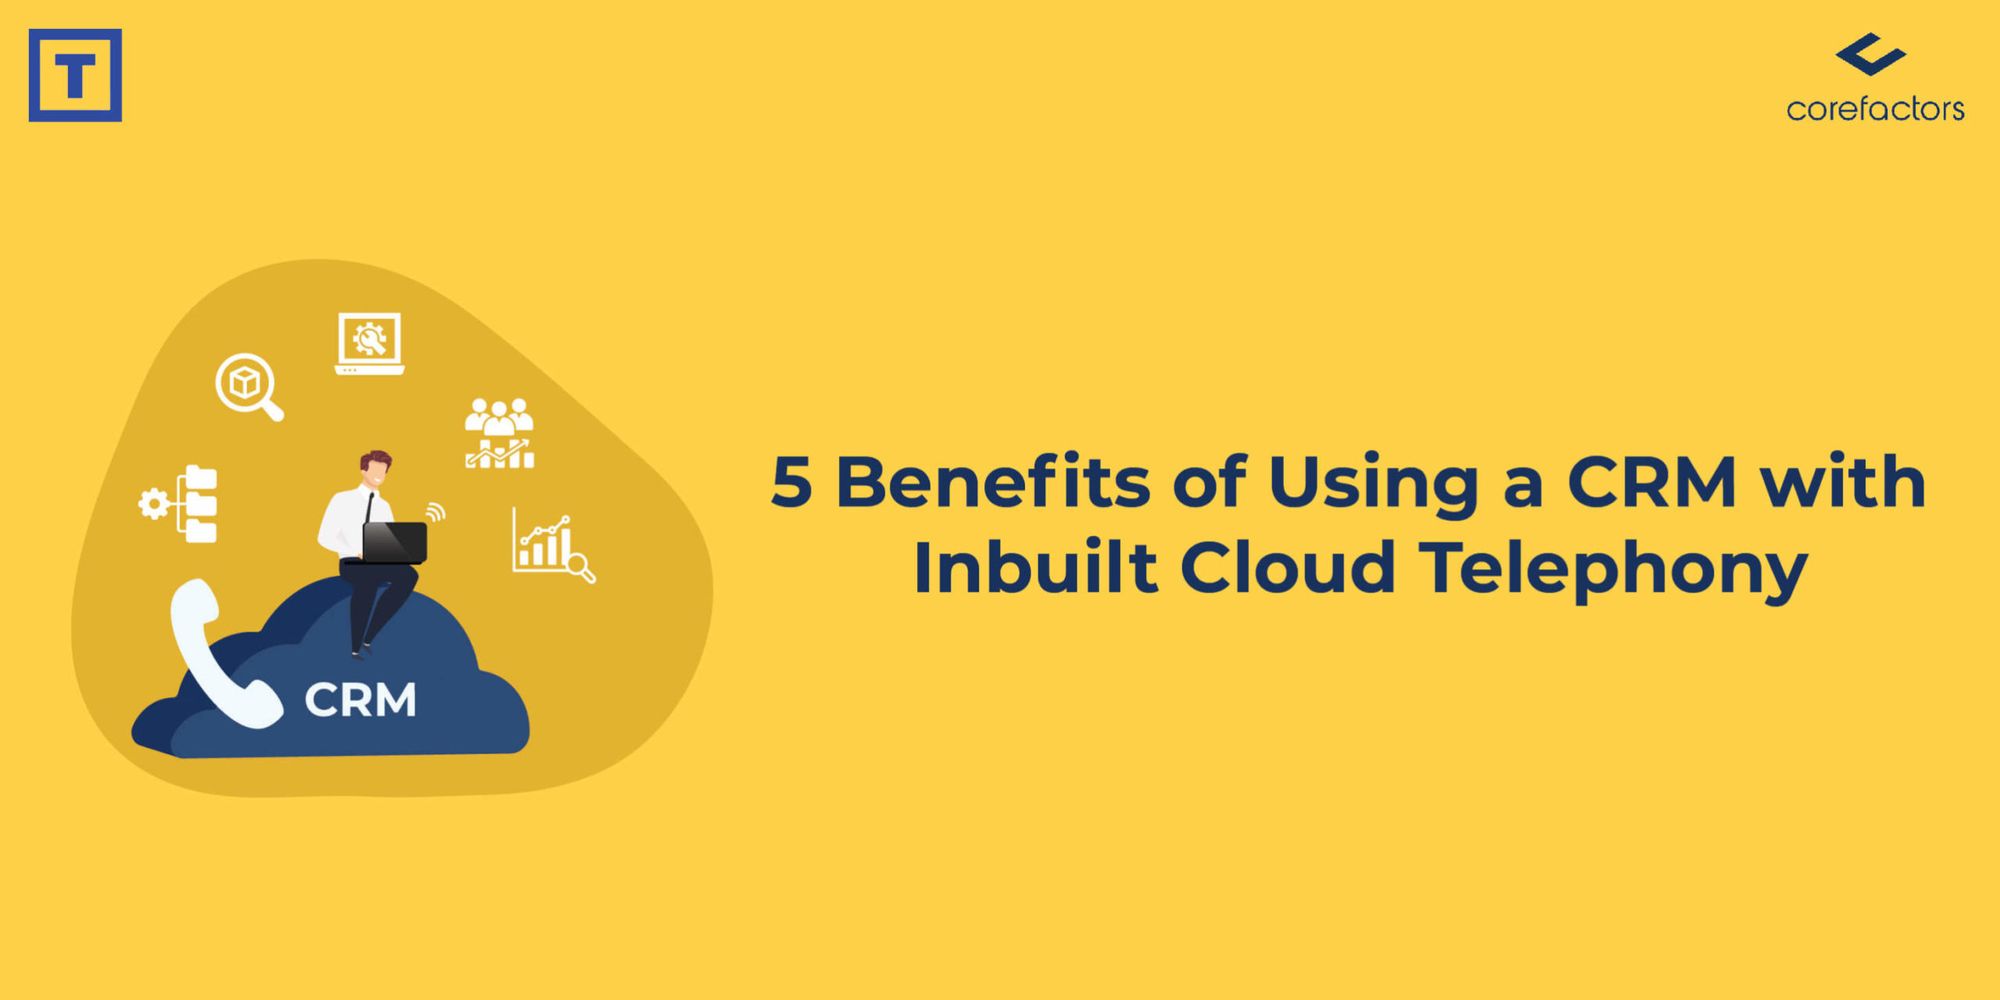 5 Benefits of Using a CRM With Inbuilt Cloud Telephony